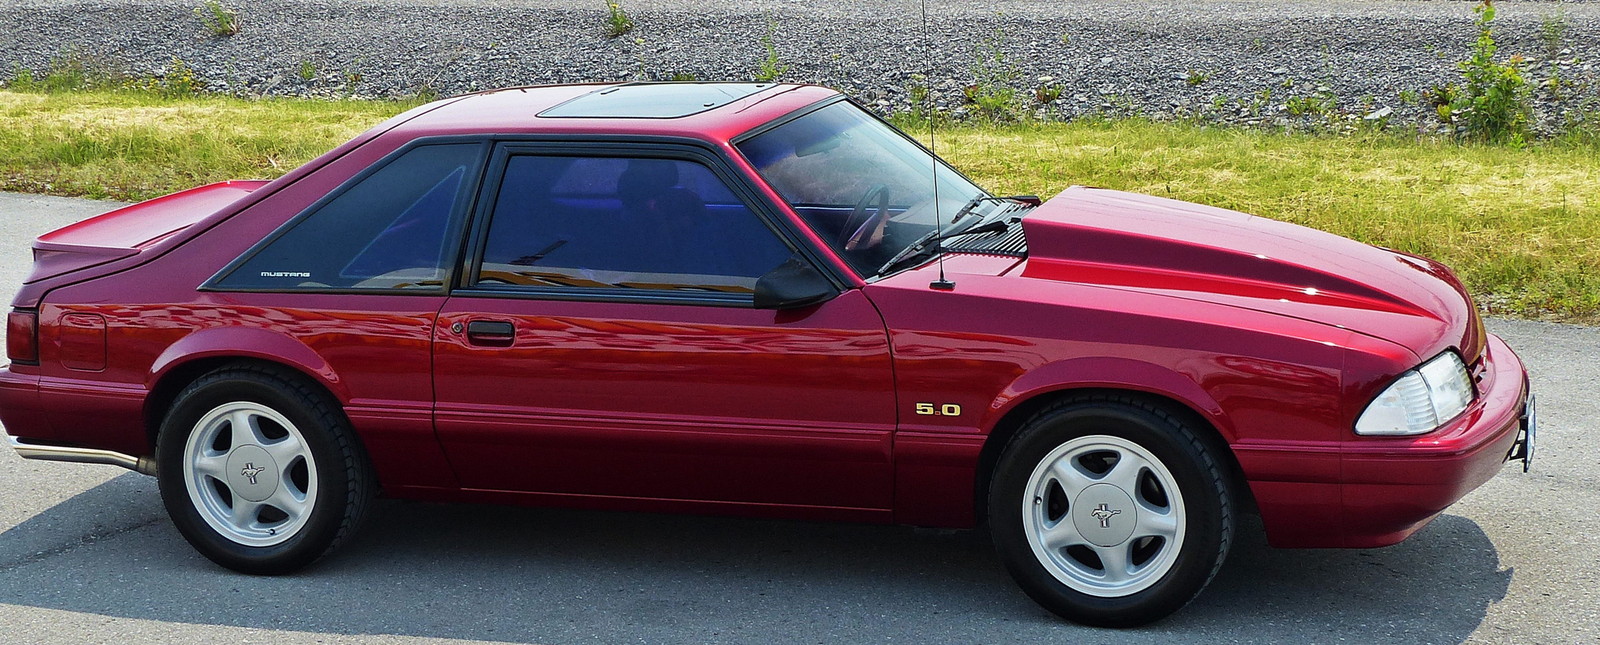 1993 Deep Cherry Ford Mustang LX Hatchback picture, mods, upgrades